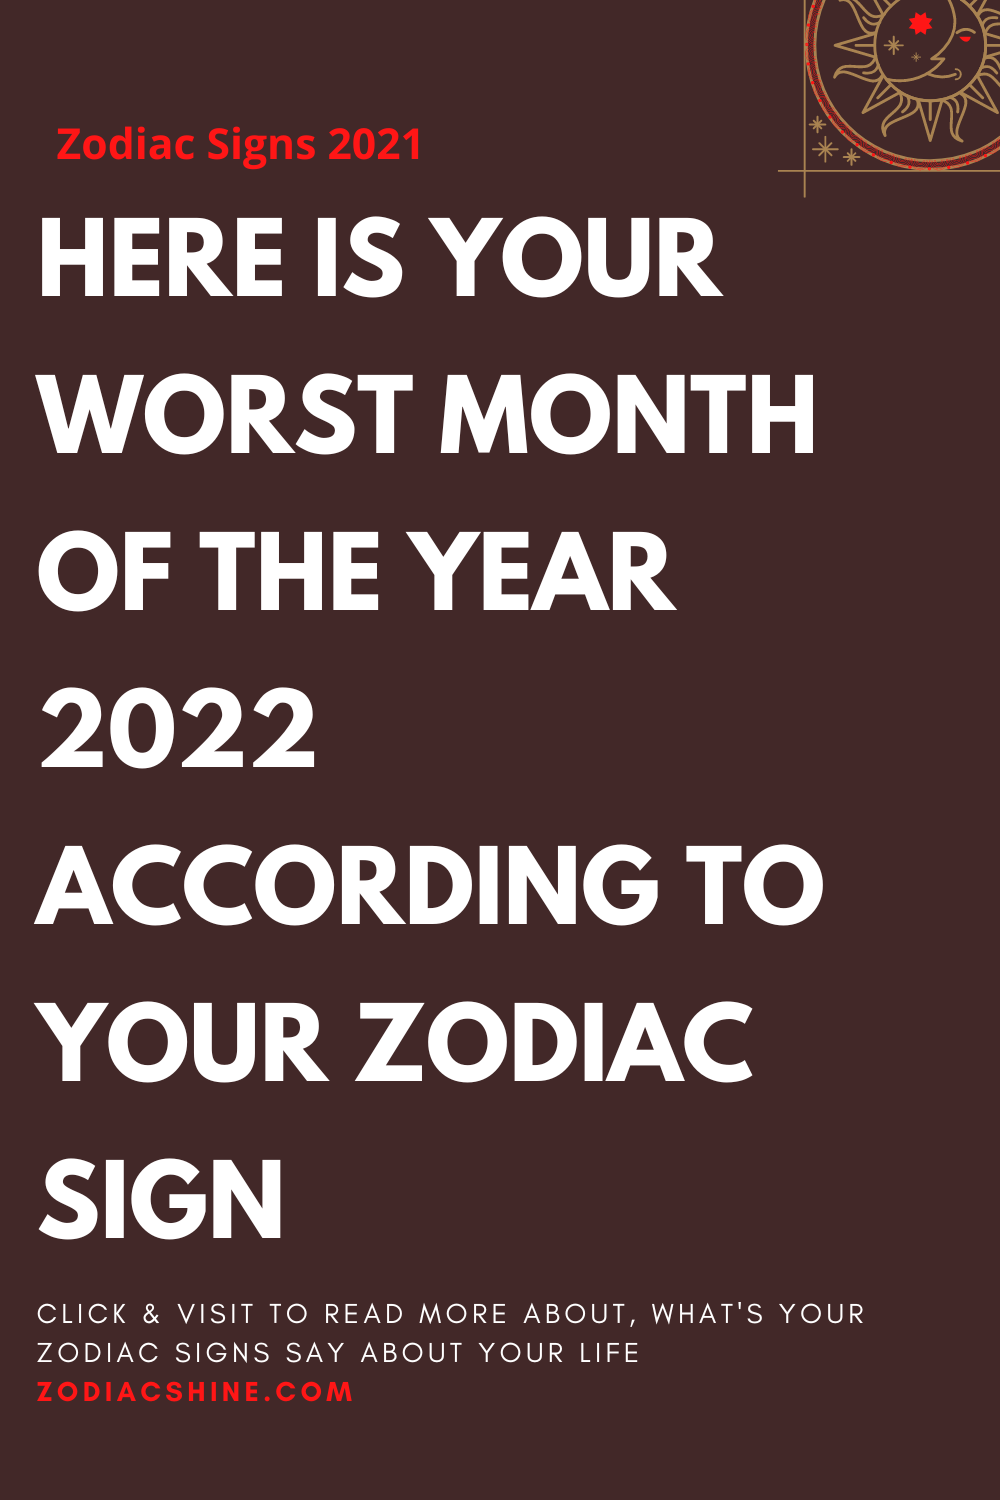 HERE IS YOUR WORST MONTH OF THE YEAR 2022 ACCORDING TO YOUR ZODIAC SIGN